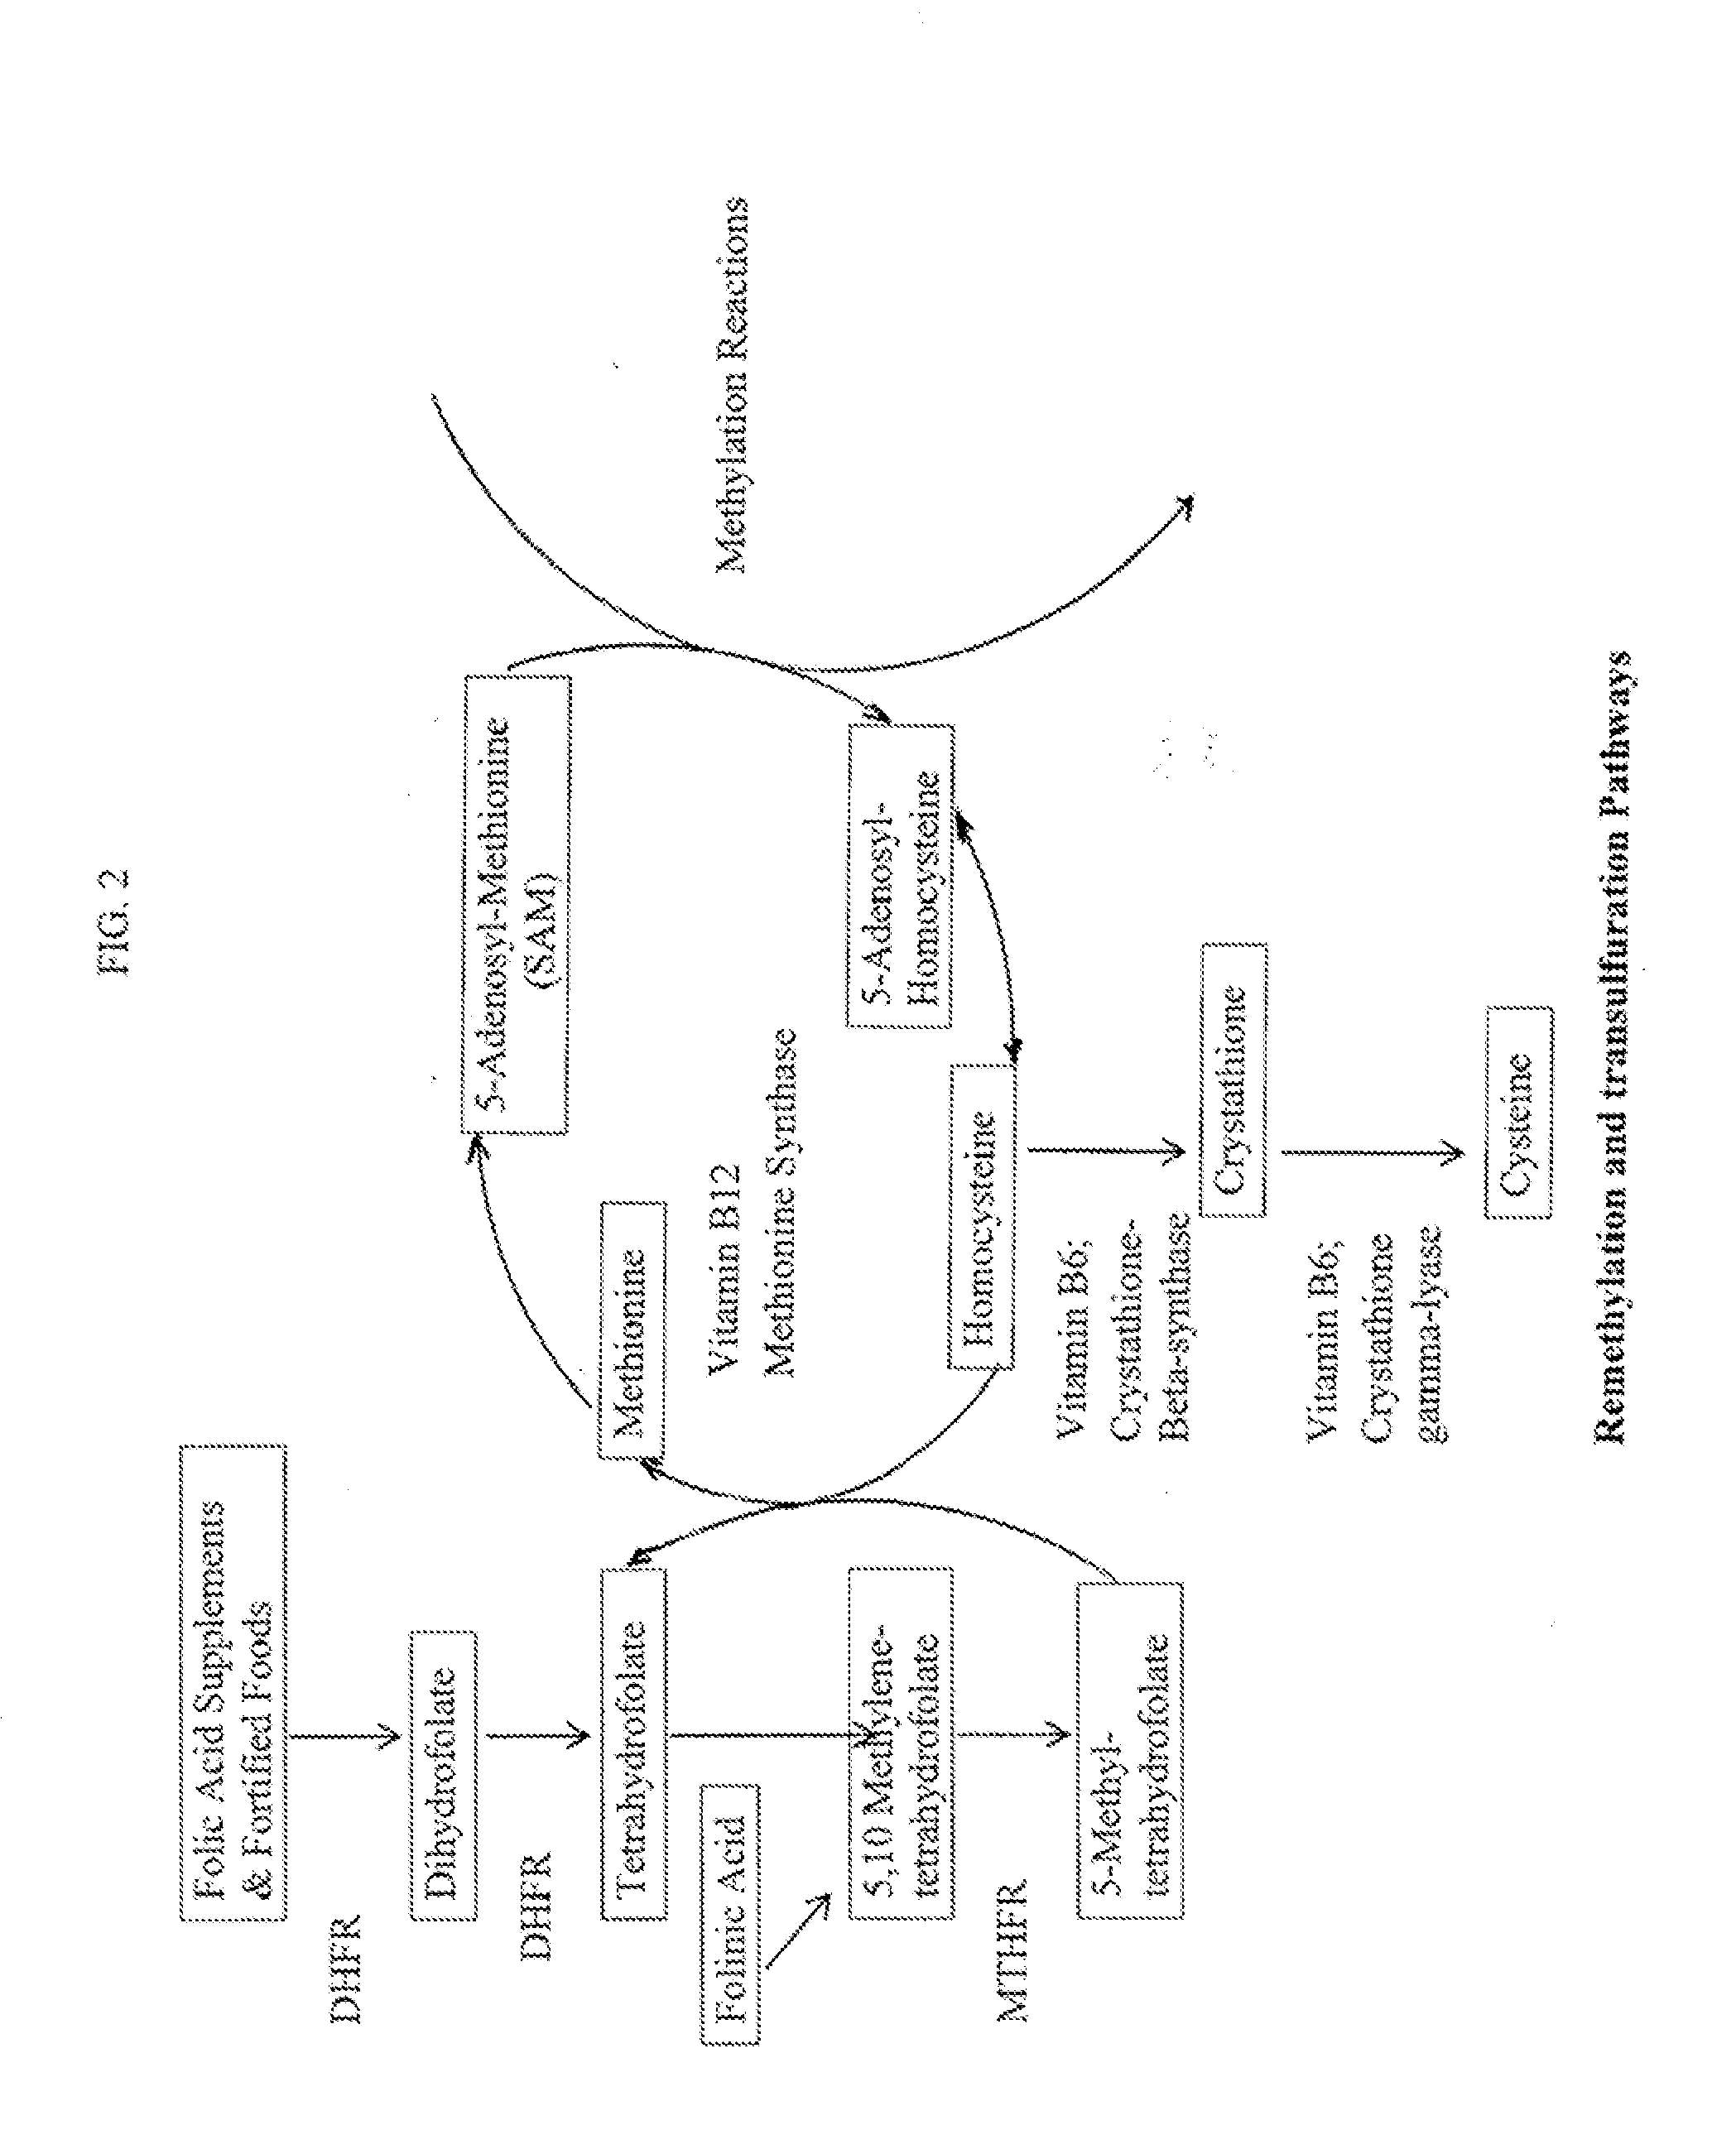 Multiple folate formulation and use thereof